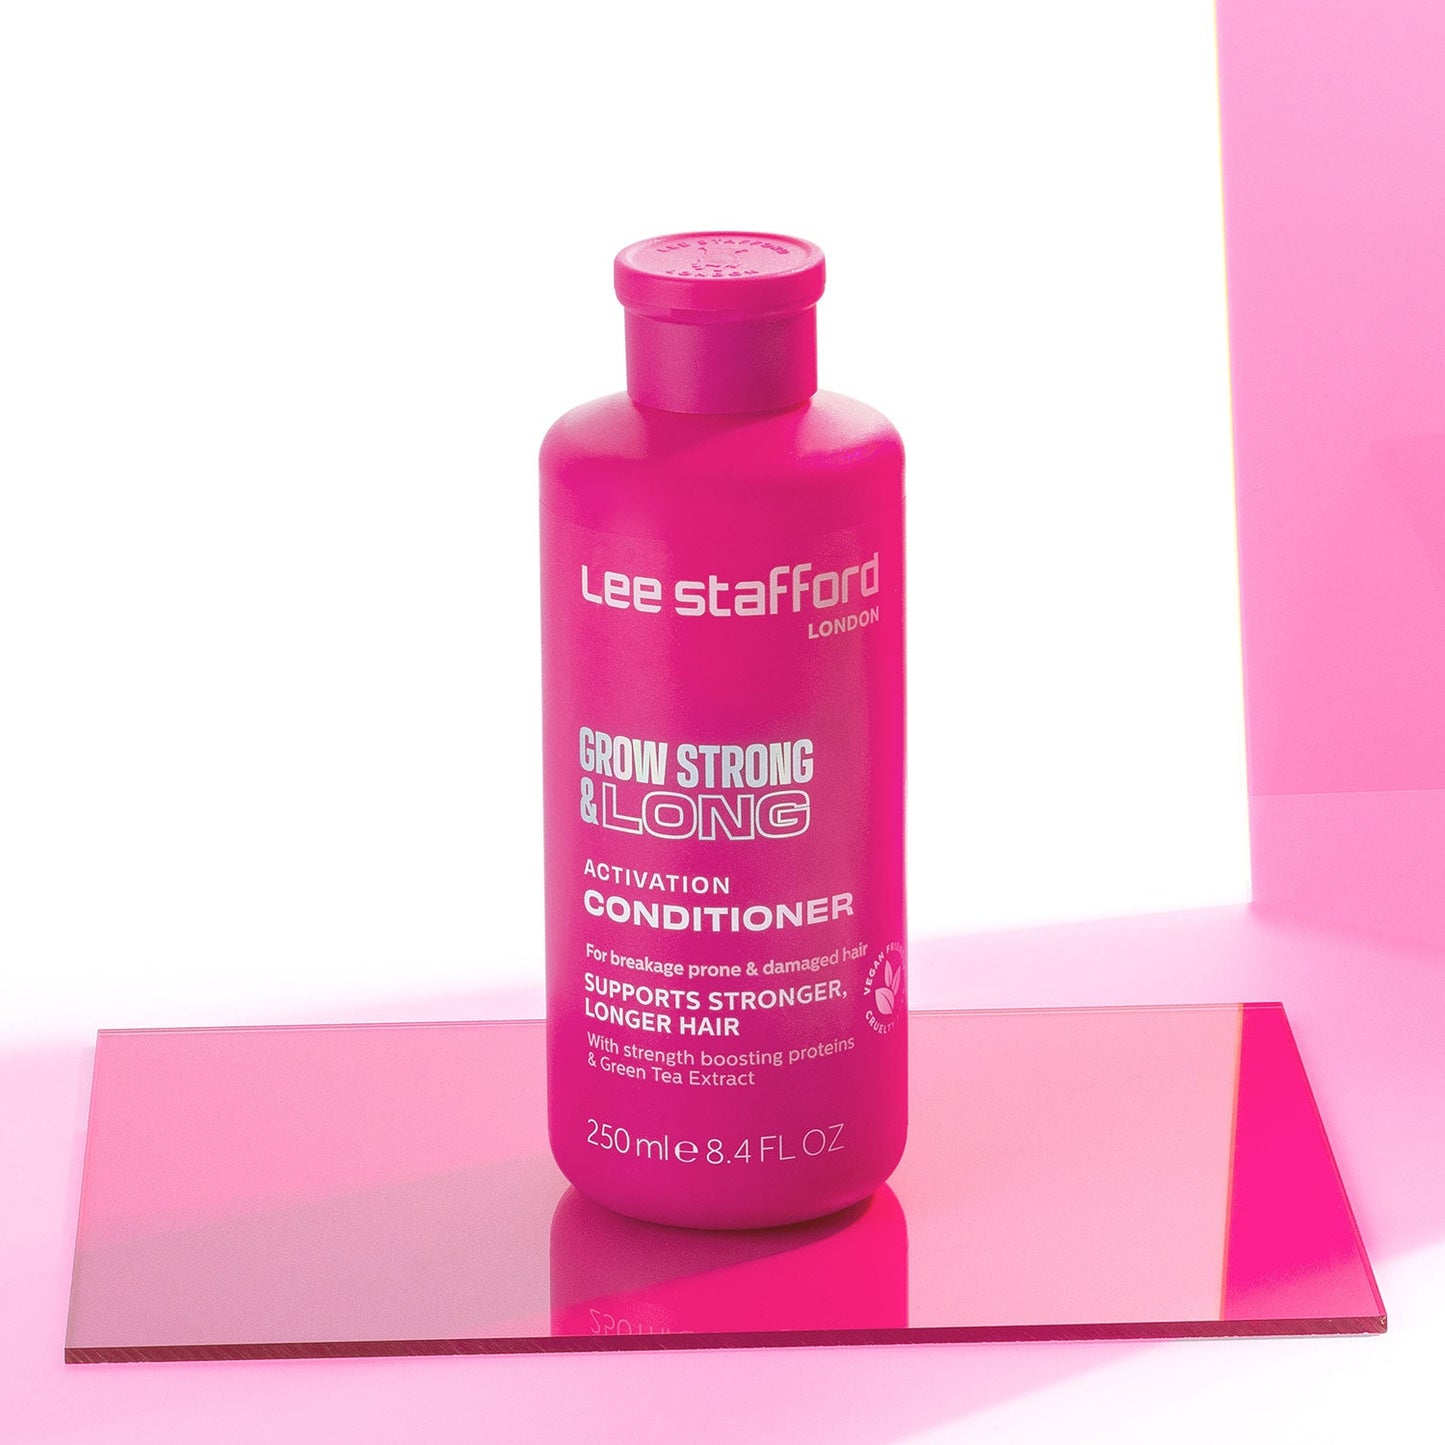 Grow Strong & Long Shampoo & Conditioner Duo